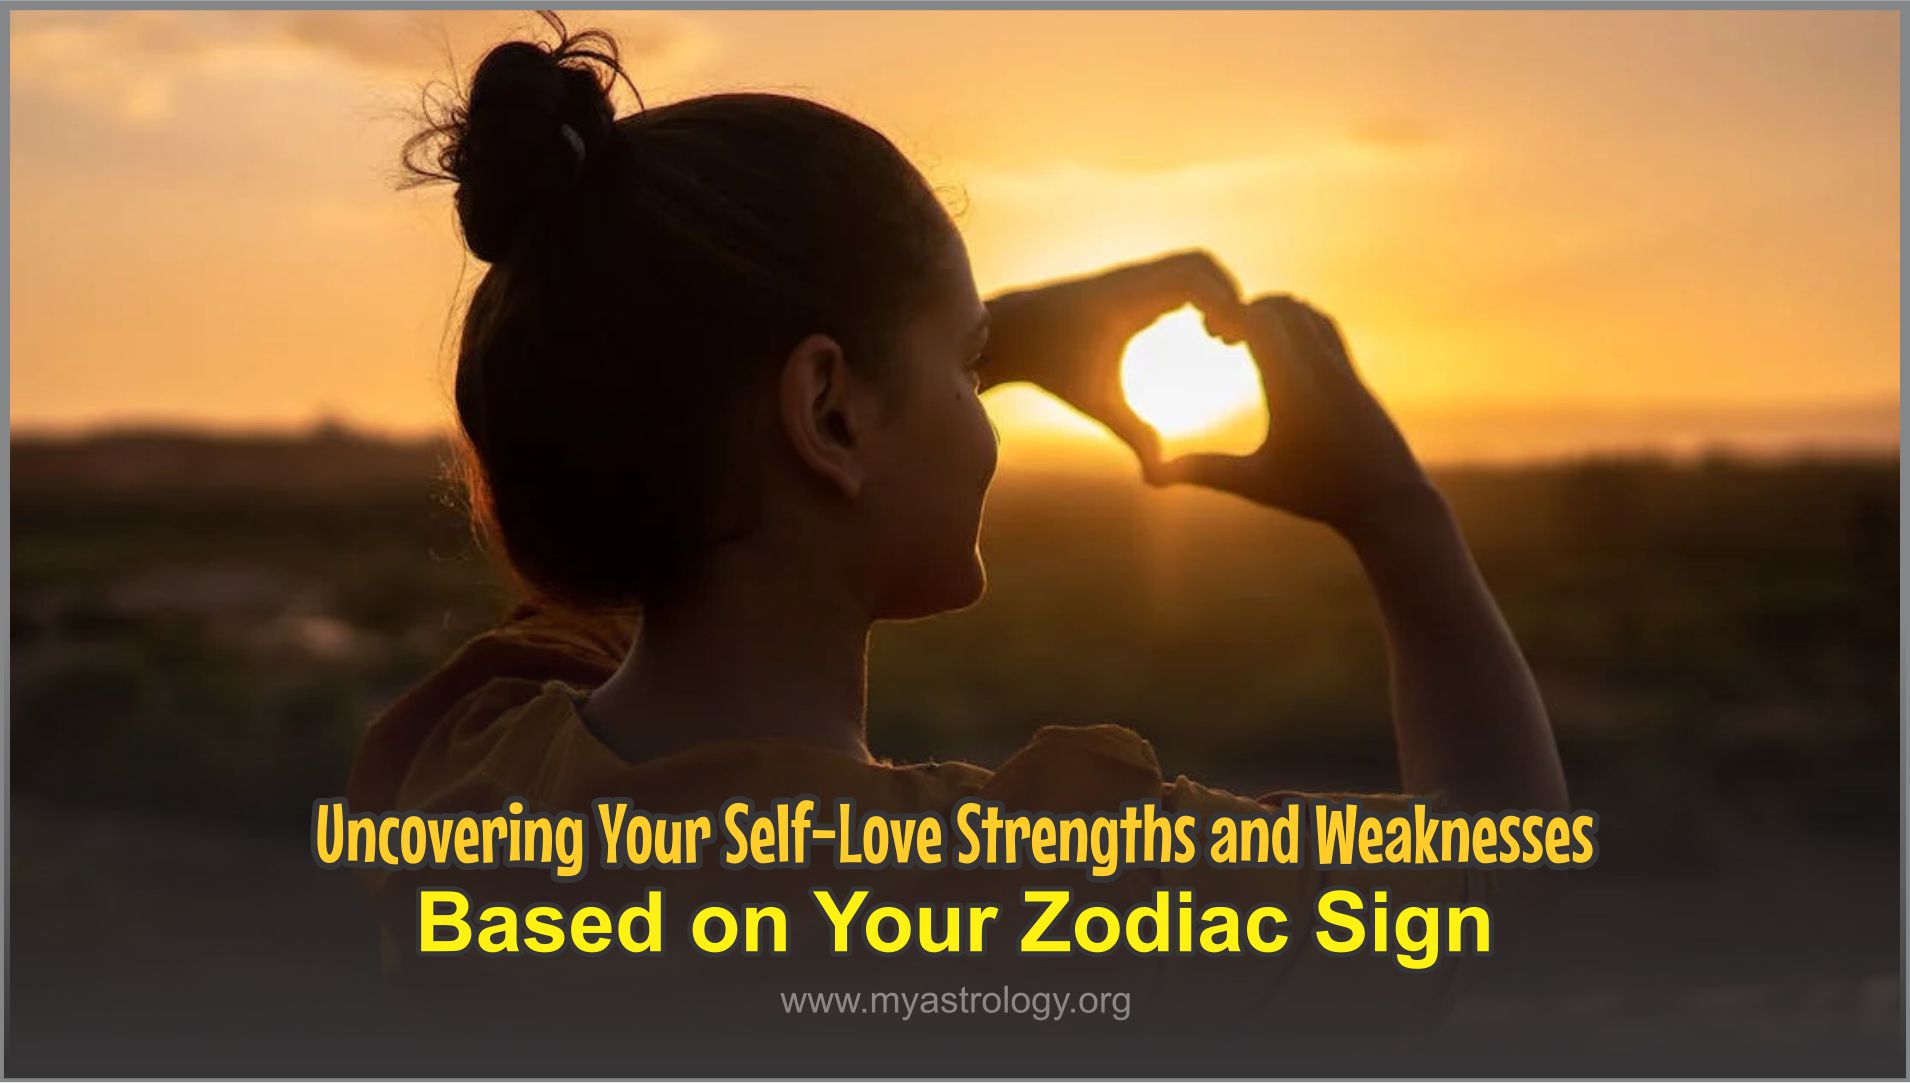 The Surprising Ways Your Zodiac Sign Influences Your Approach to Self-Love